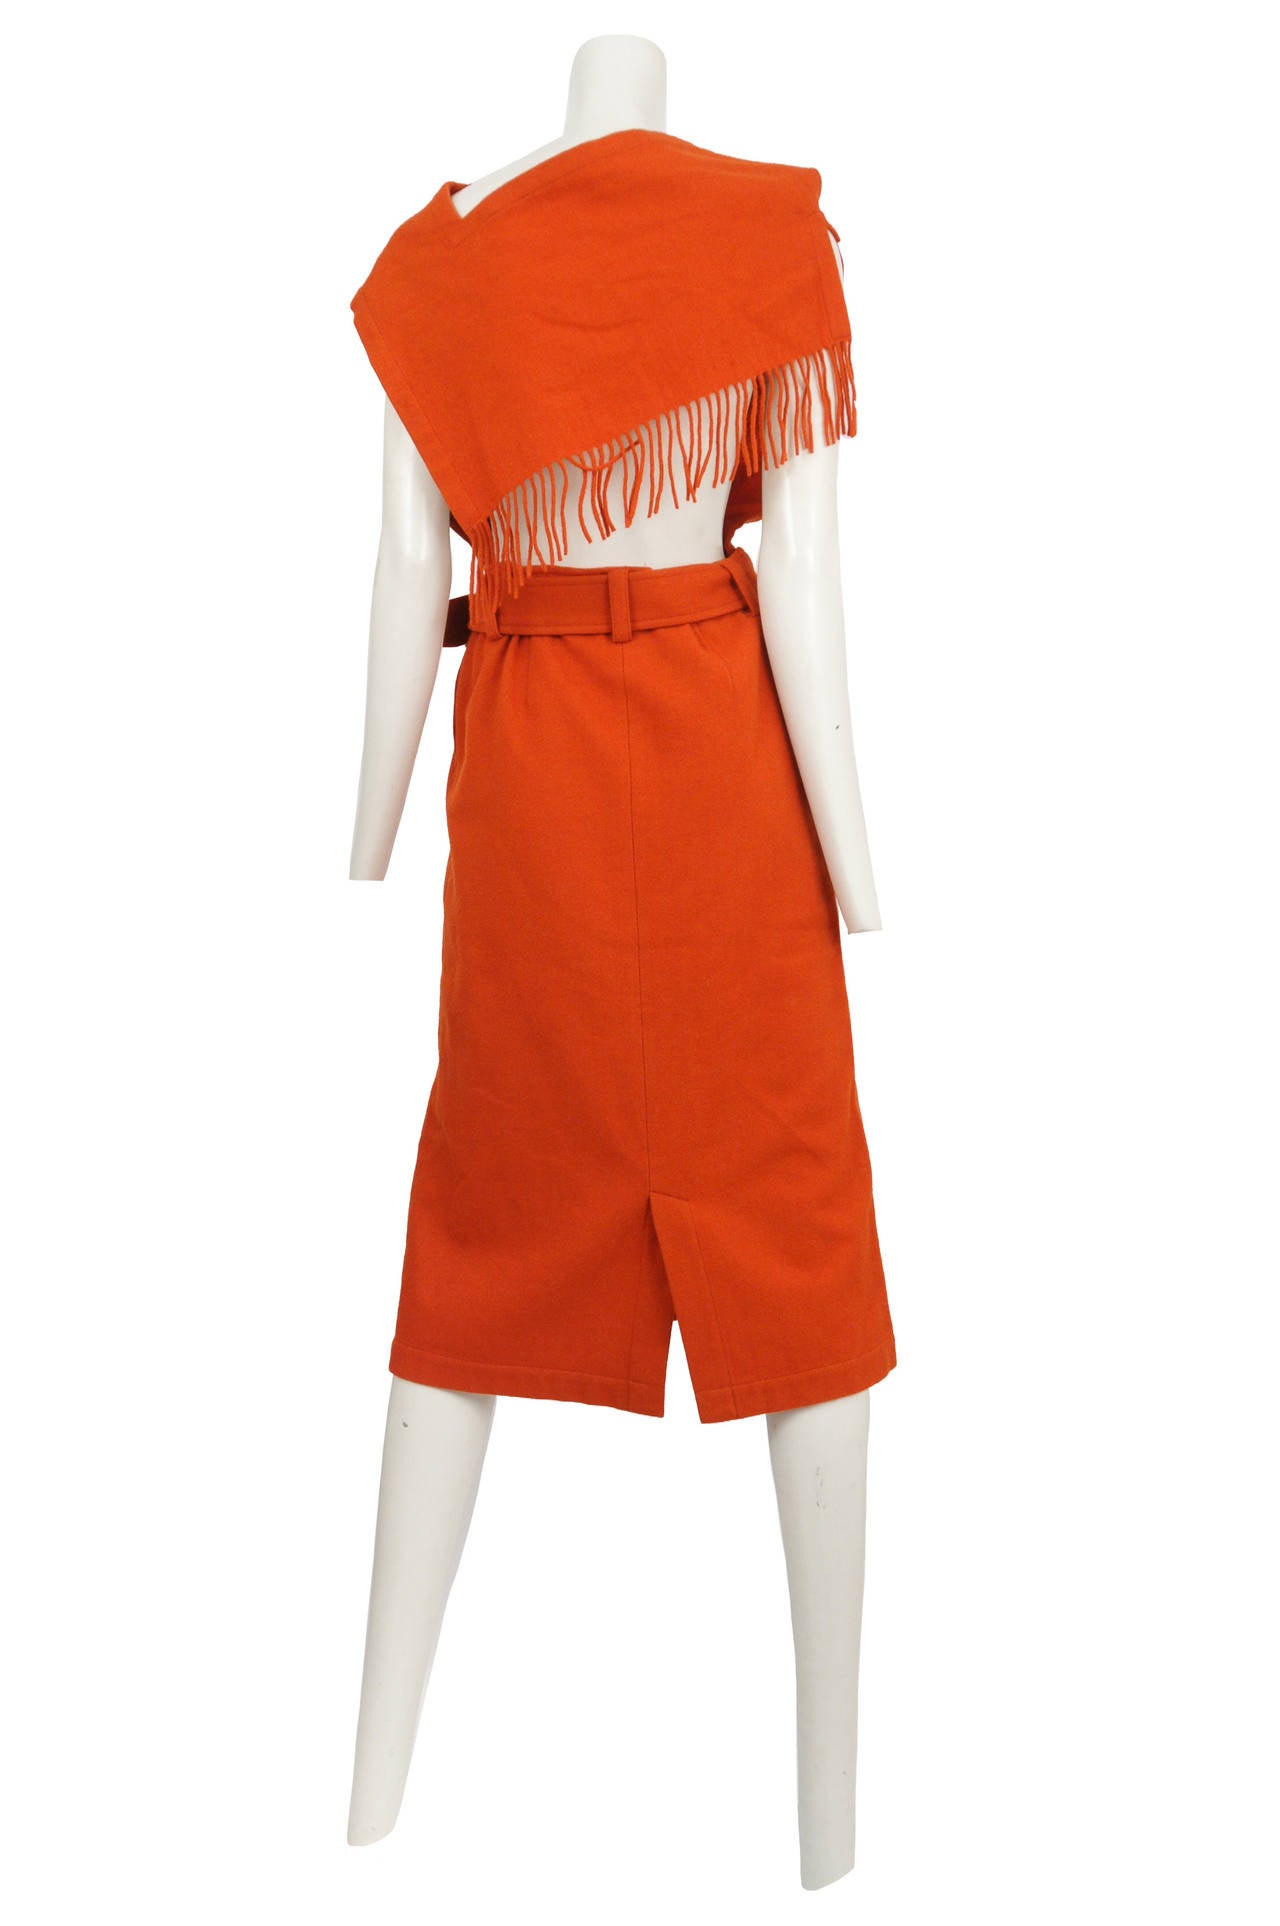 Comme des Garcons burnt orange scarf inspired backless dress with matching belt. The back of this dress is completely open suggesting a flat apron. Circa 1989.